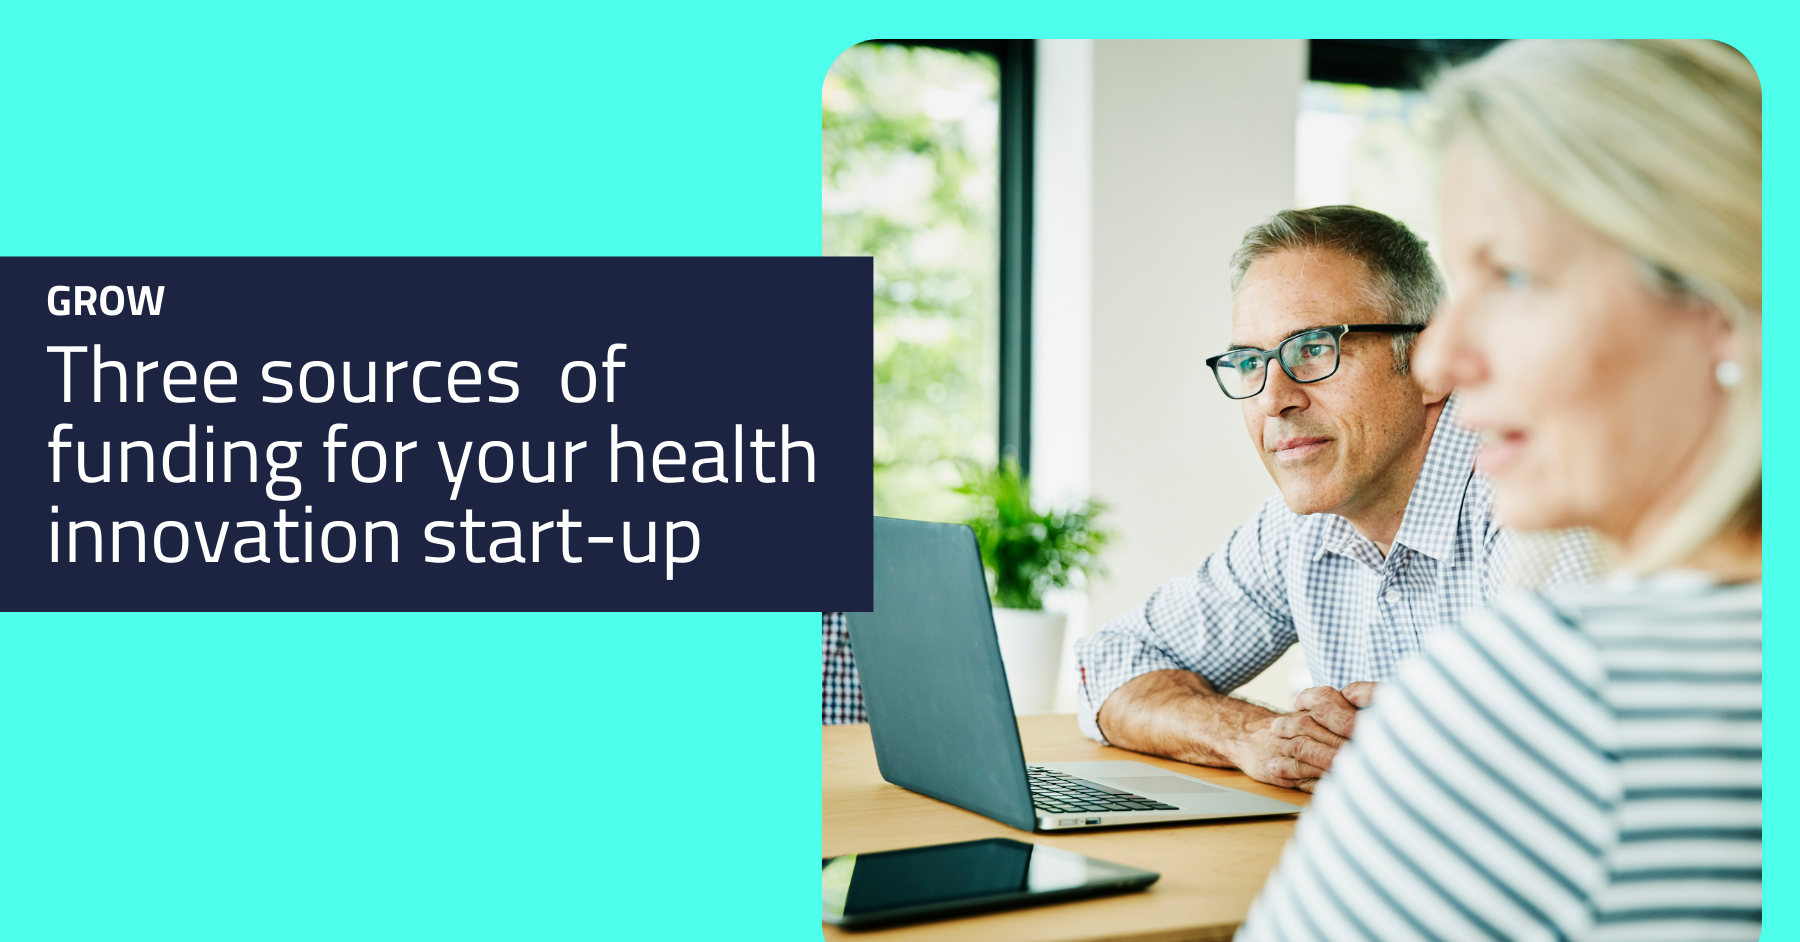 Three sources of funding for your health innovation start-up